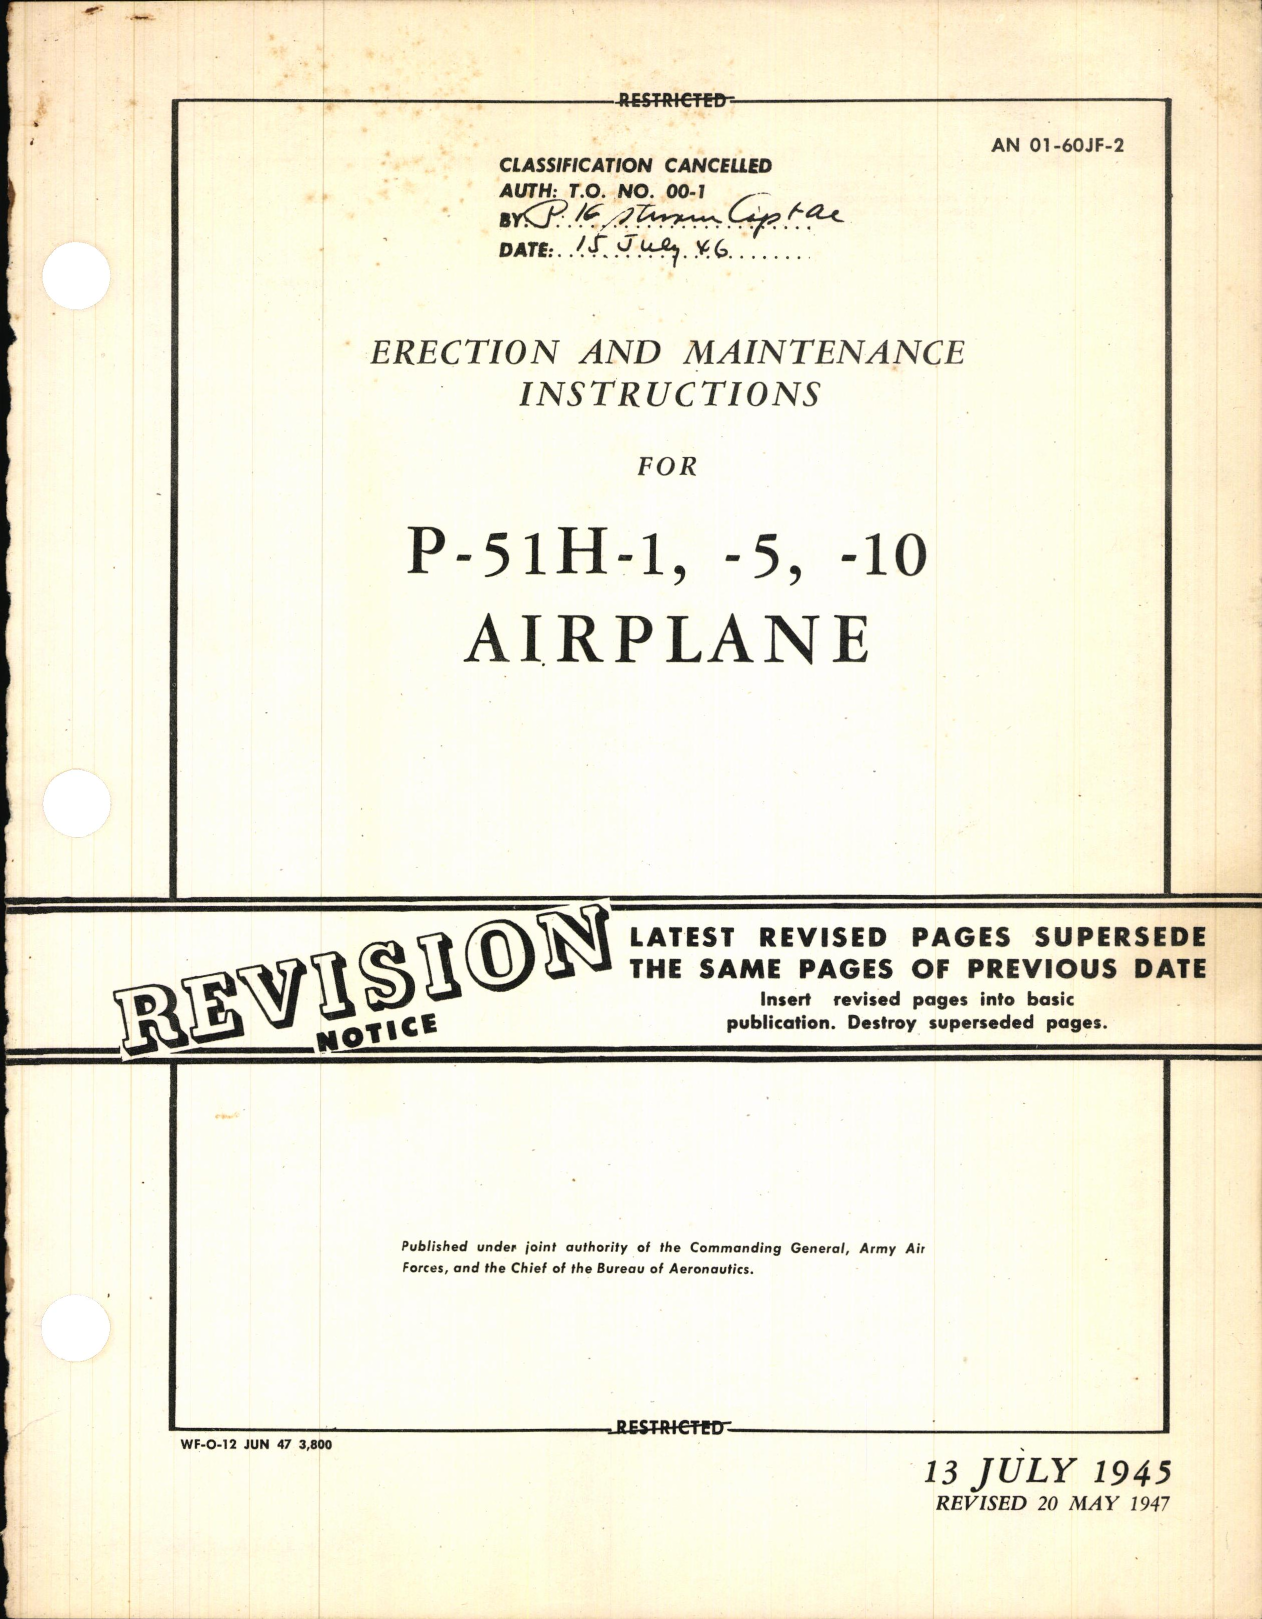 Sample page 1 from AirCorps Library document: Erection and Maintenance Instructions for P-51H-1, -5, and -10